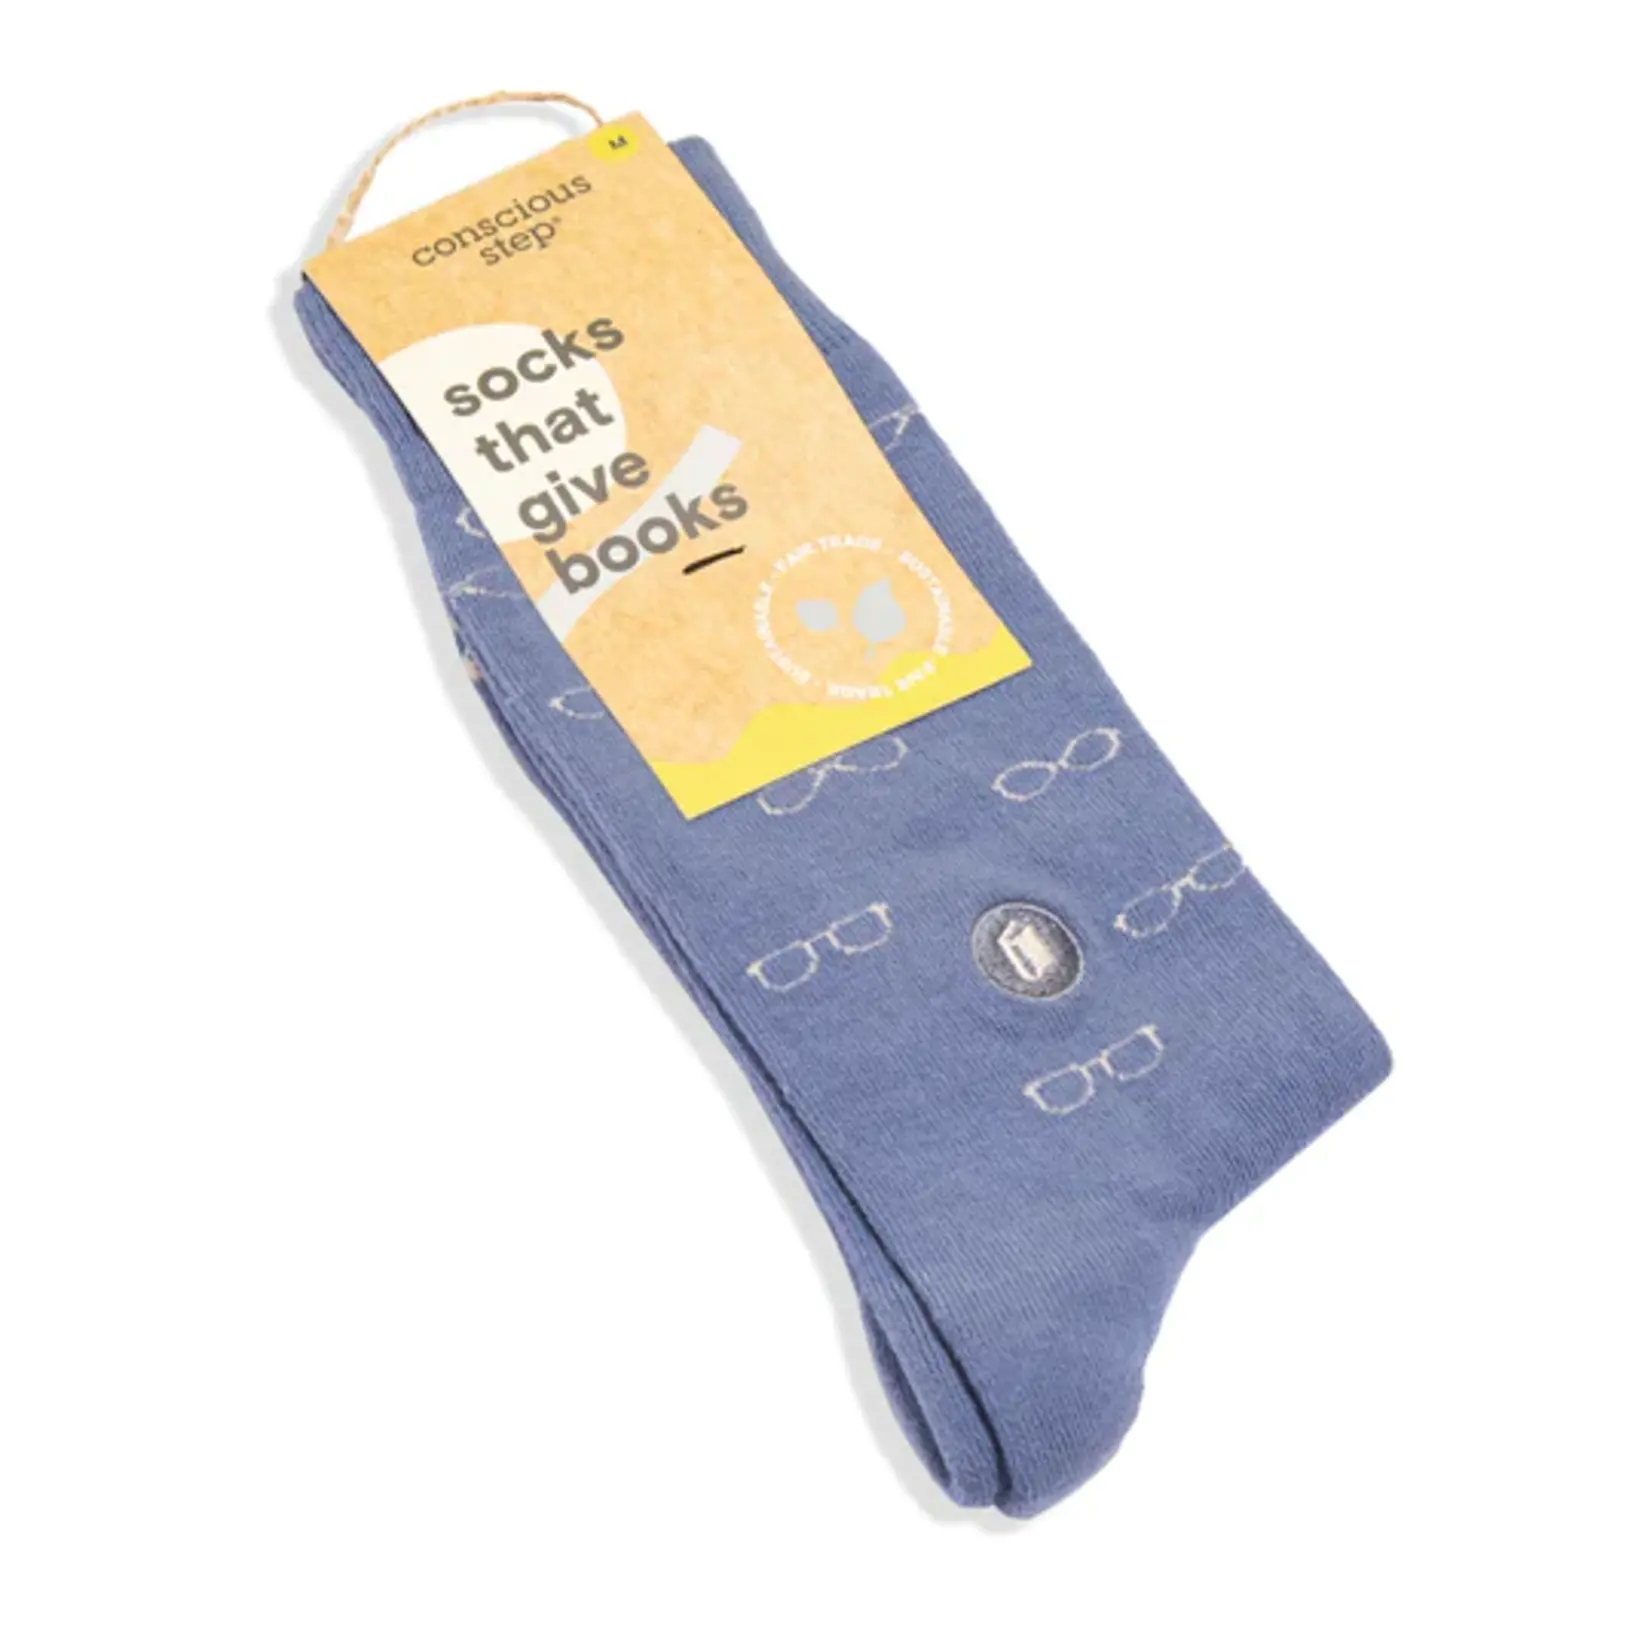 Conscious Step Socks that Give Books | Small | Blue